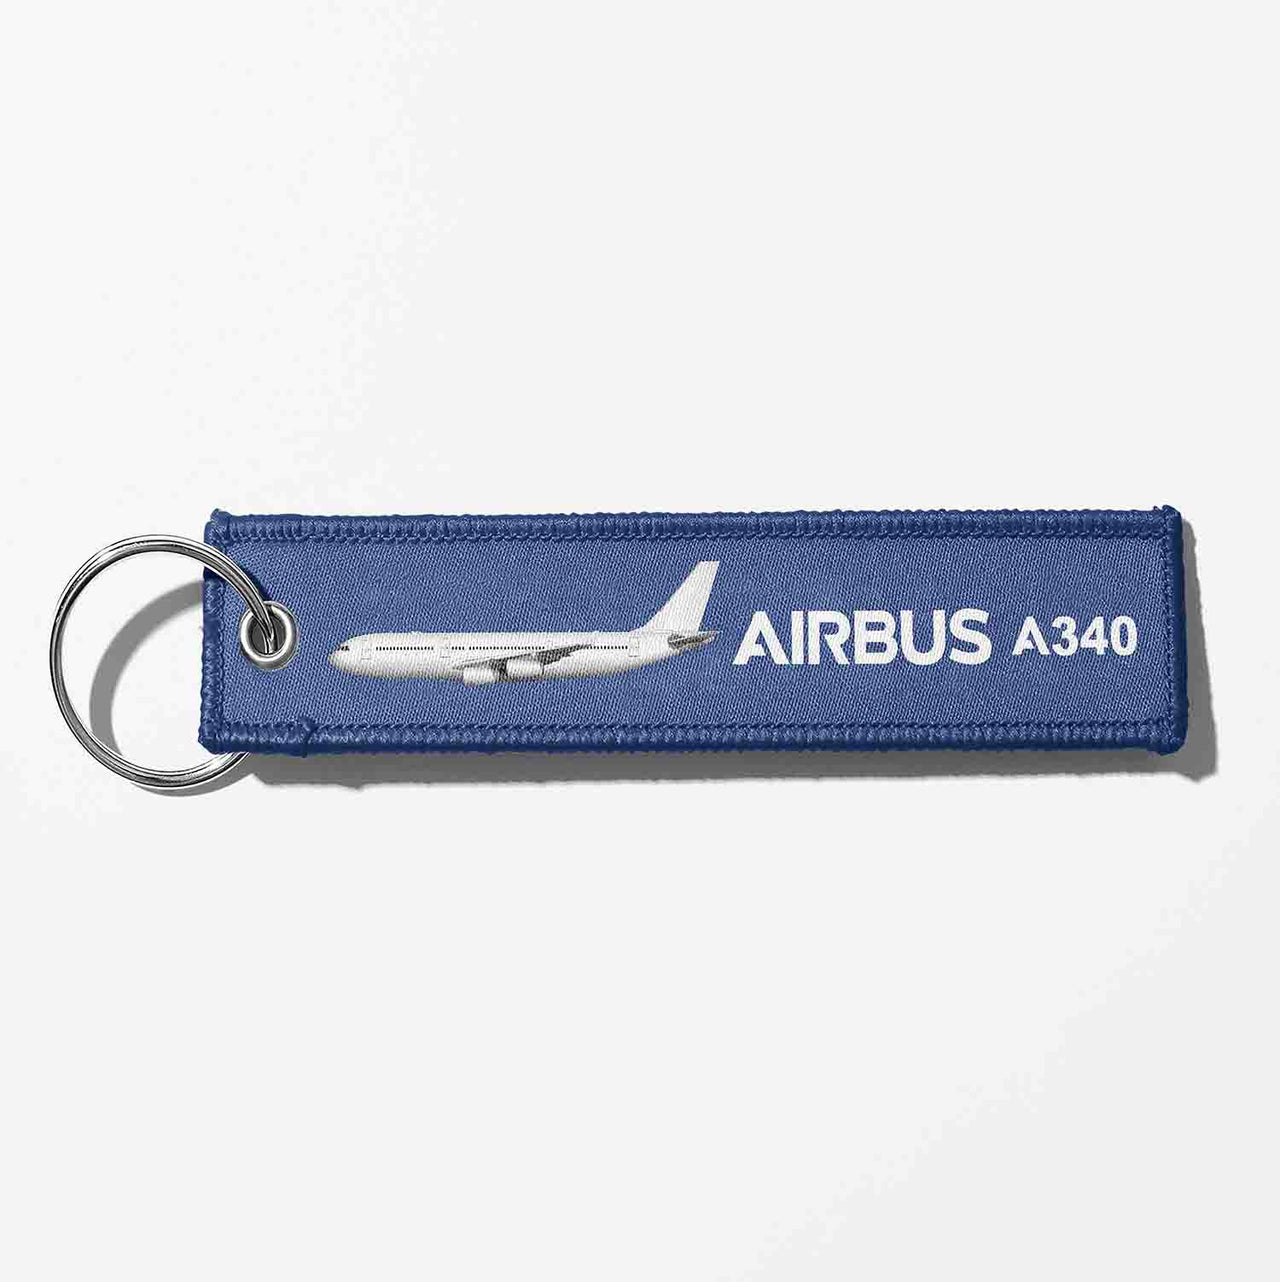 The Airbus A340 Designed Key Chains